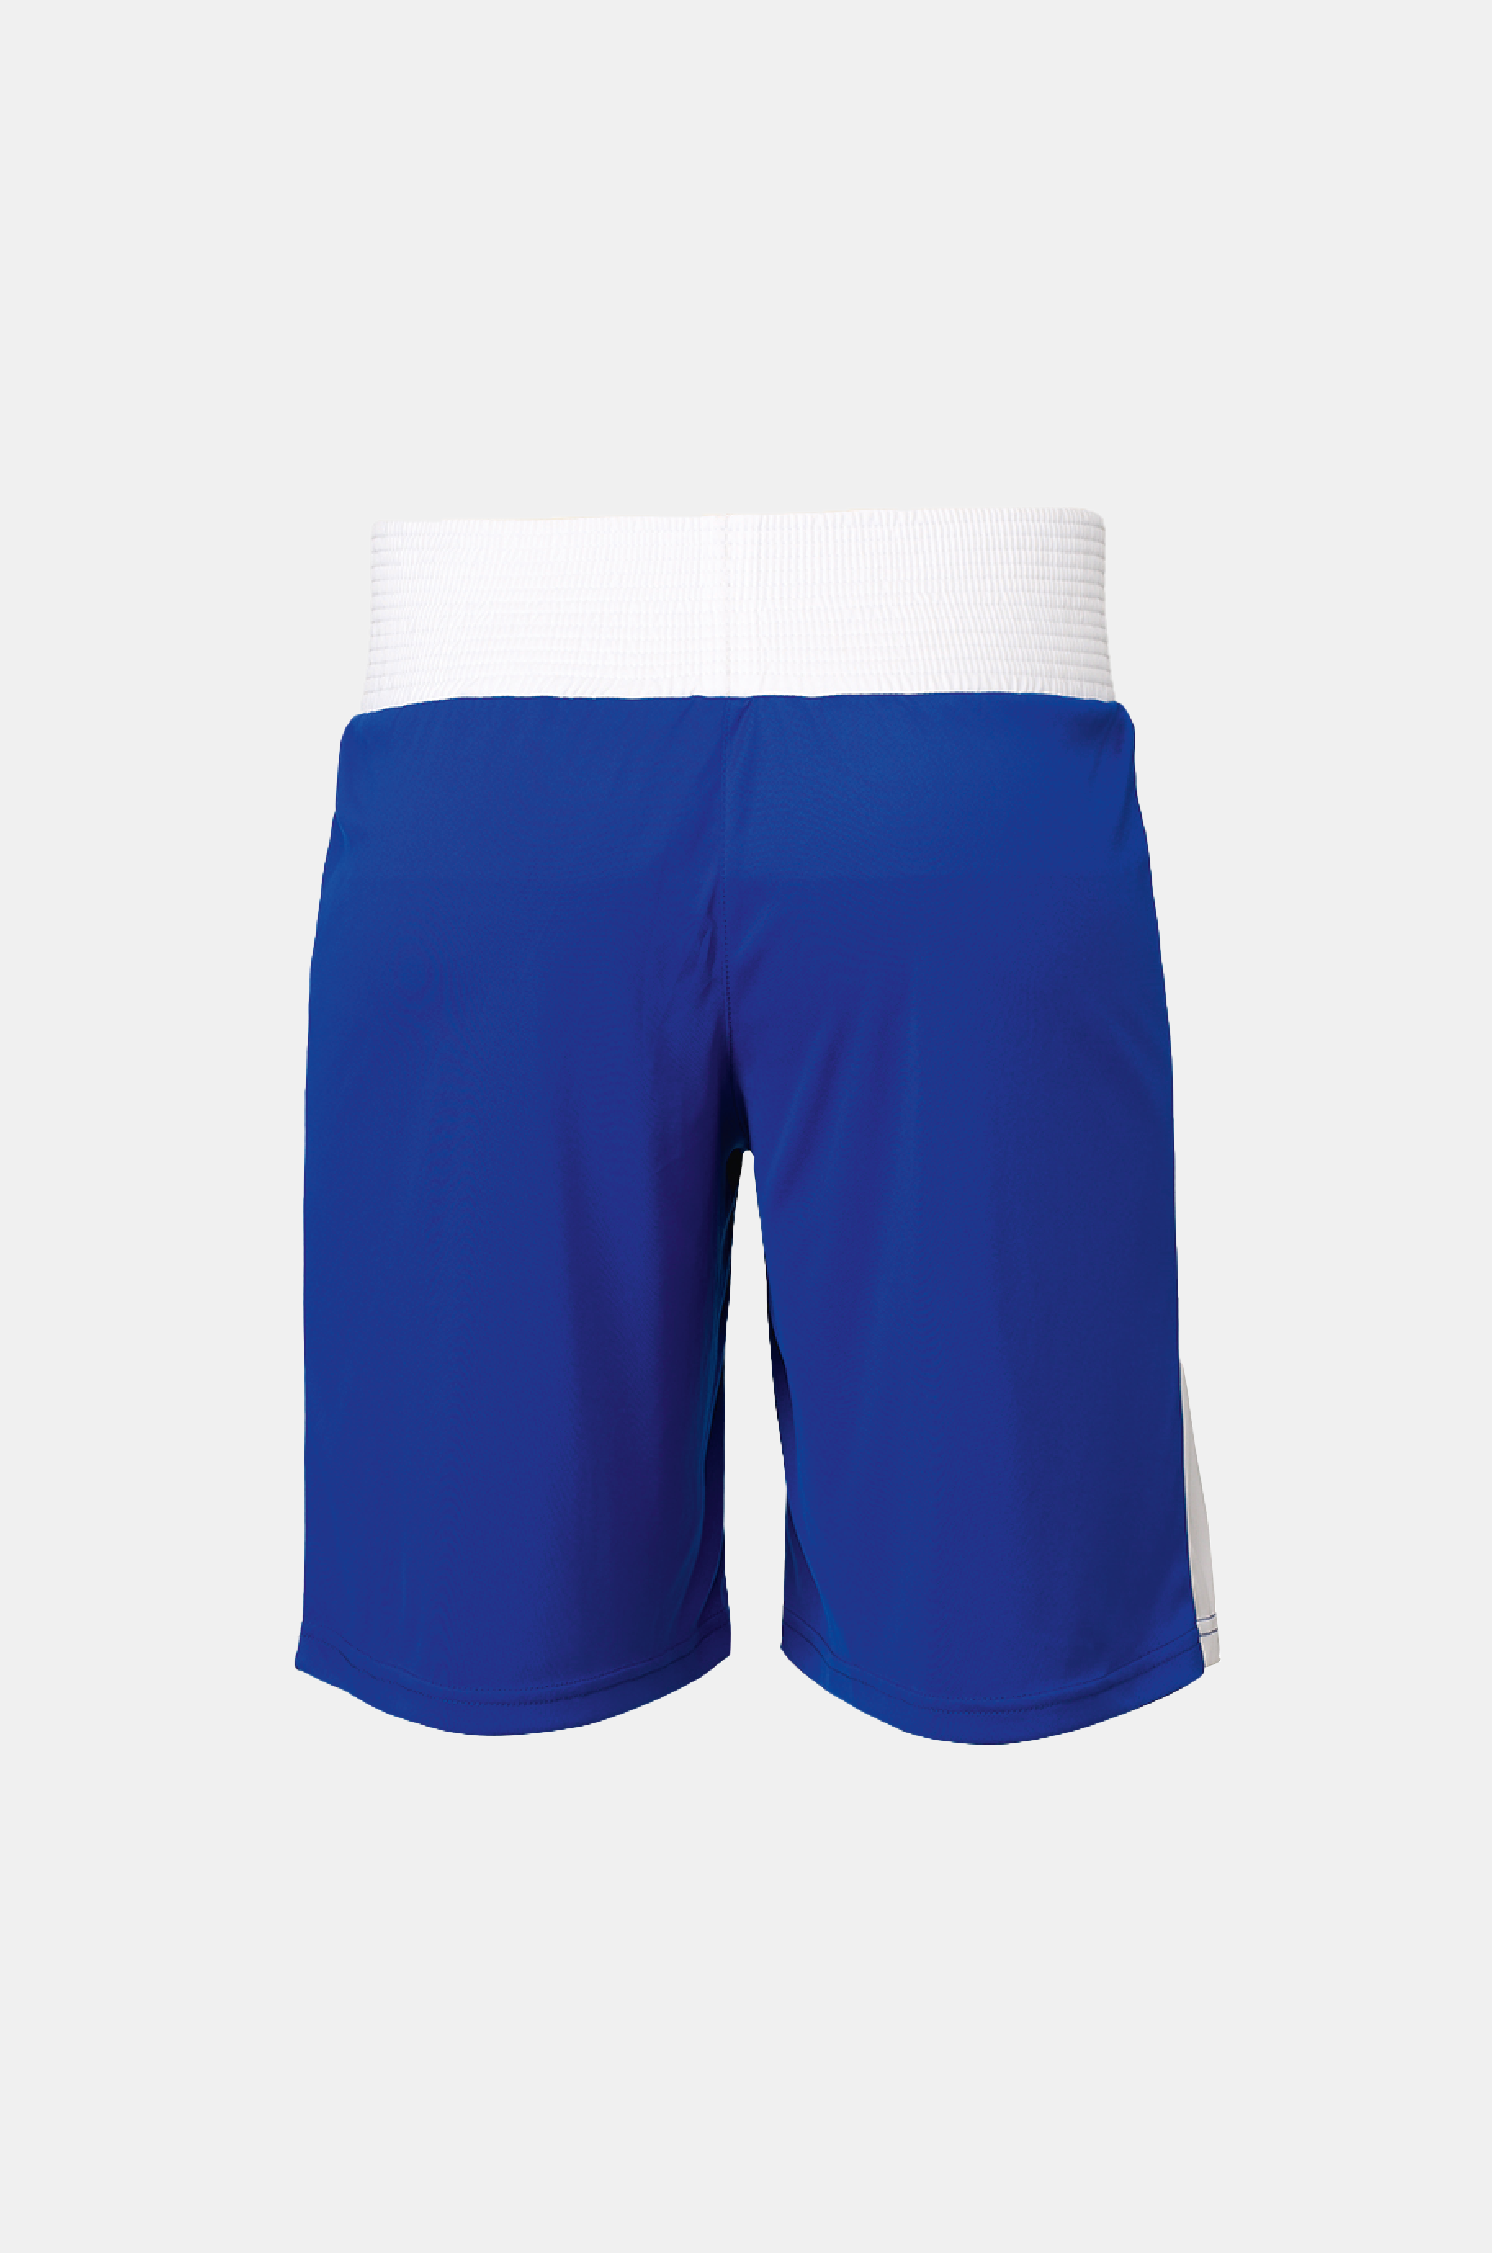 STING Mettle Boxing Short Blue